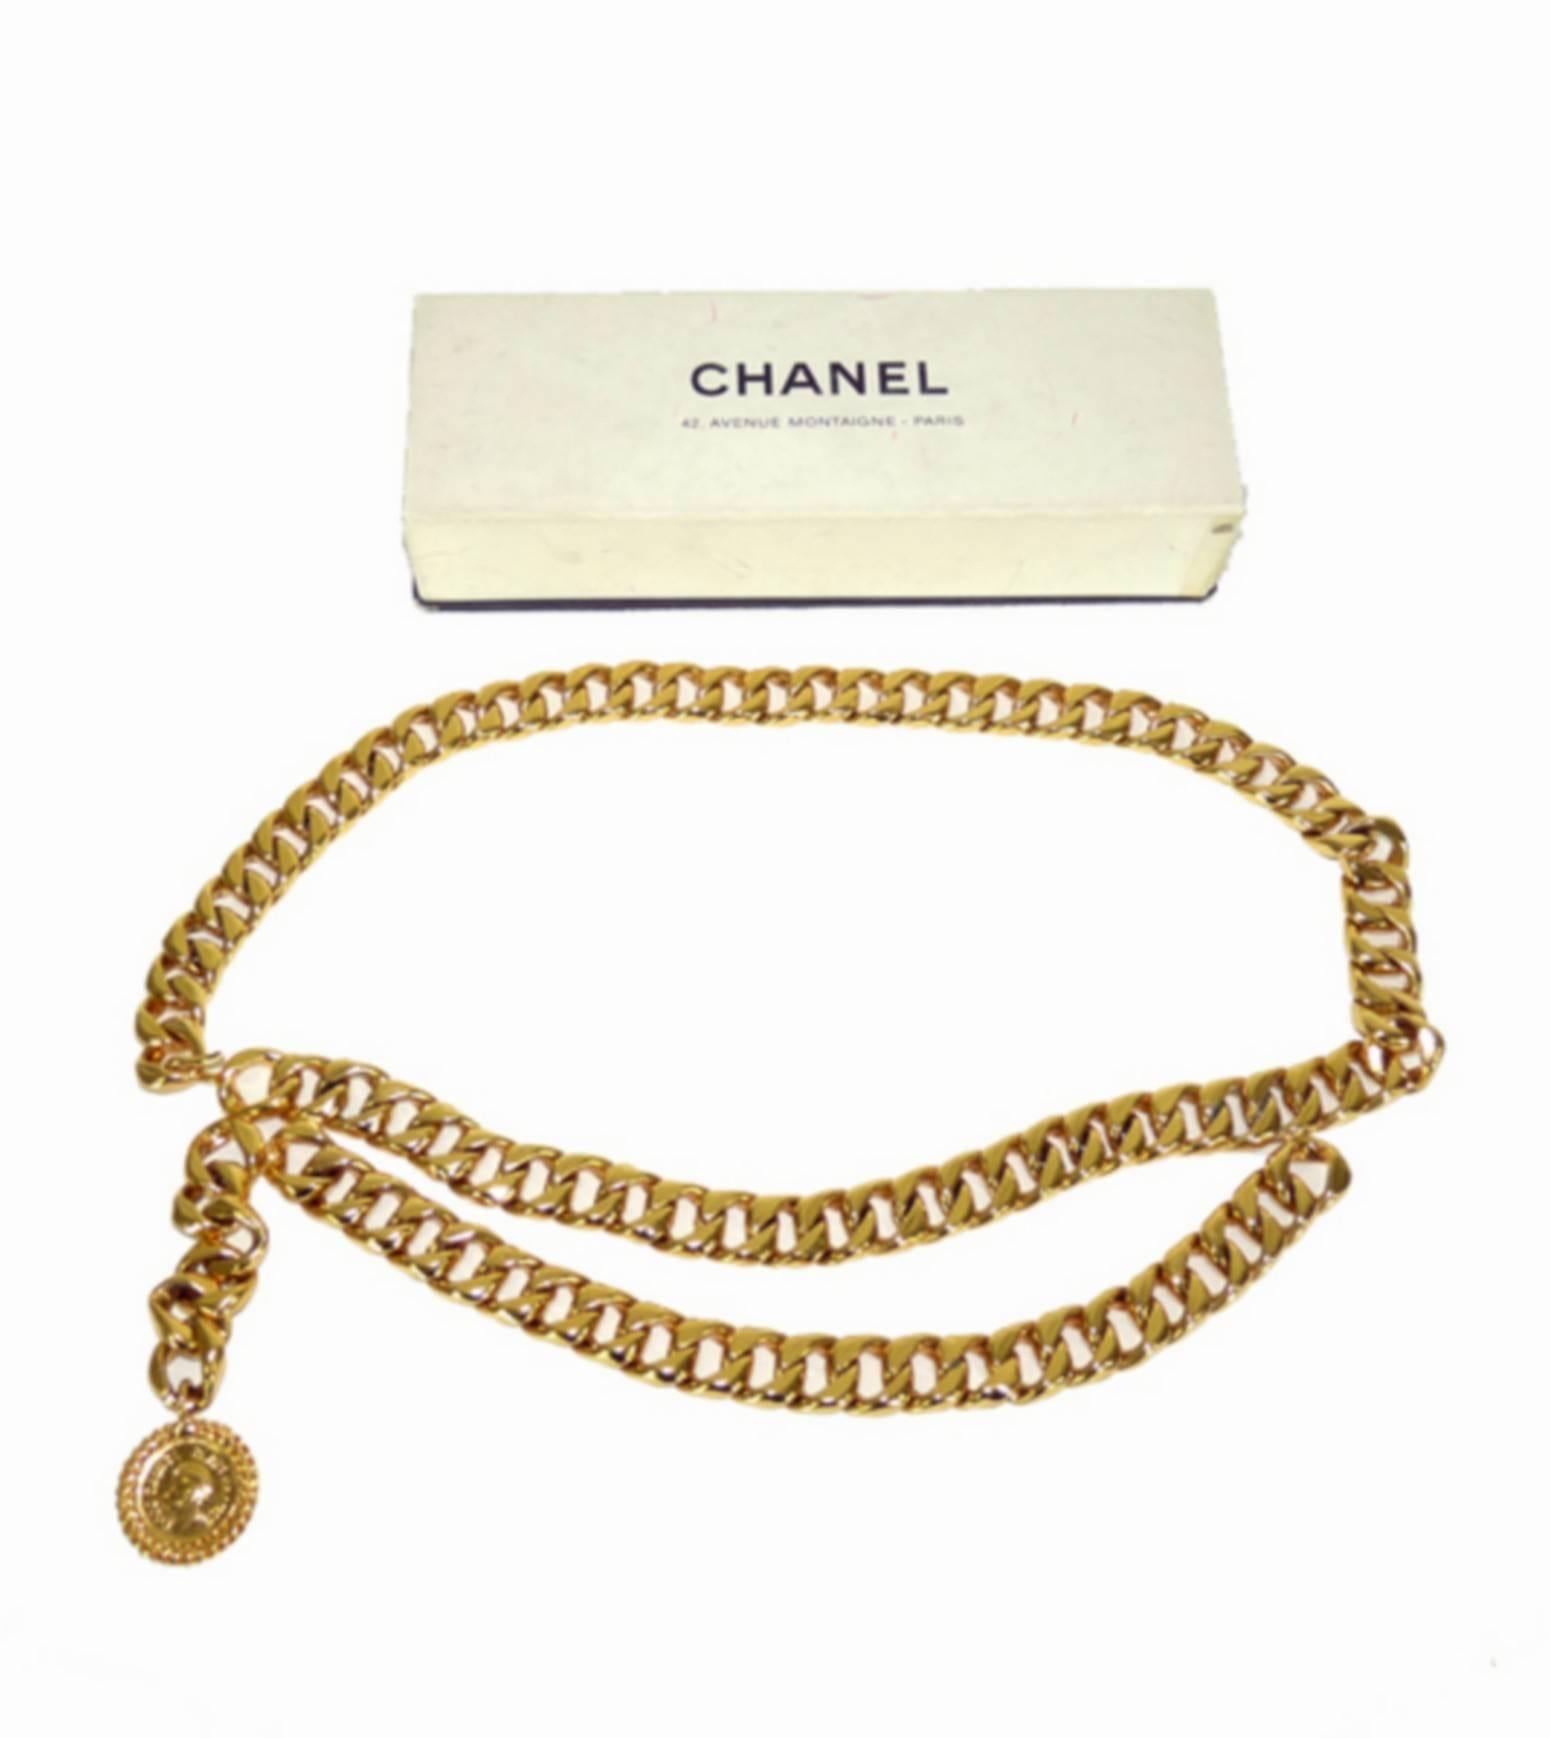 A classic Chanel 
Beautiful belt with big golden metal links.
Double row before.
Double-faced effigy with the effigy of Coco Chanel
Free hanging at all points of the chain.
Chanel punch.
Waist up to 80 cms
Good condition
Delivered with its box